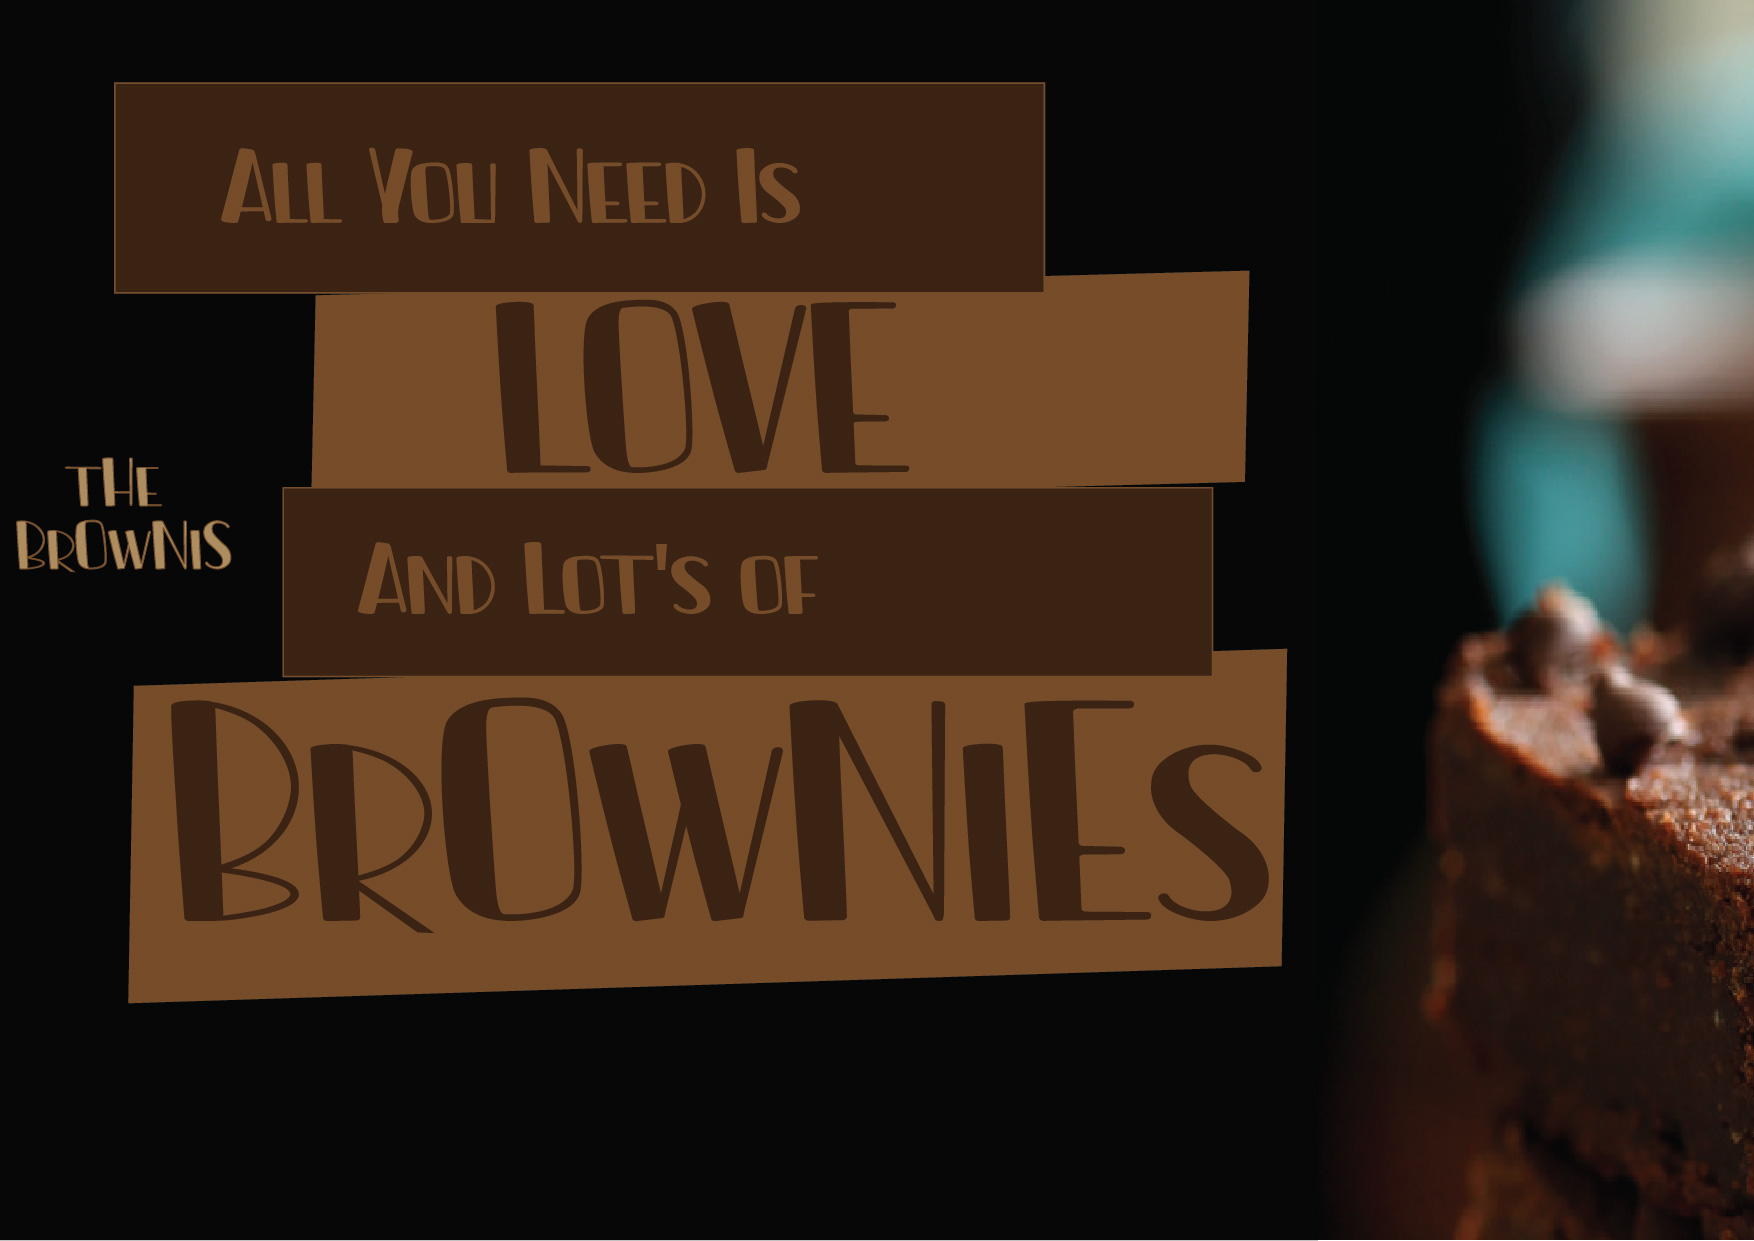 The Brownis